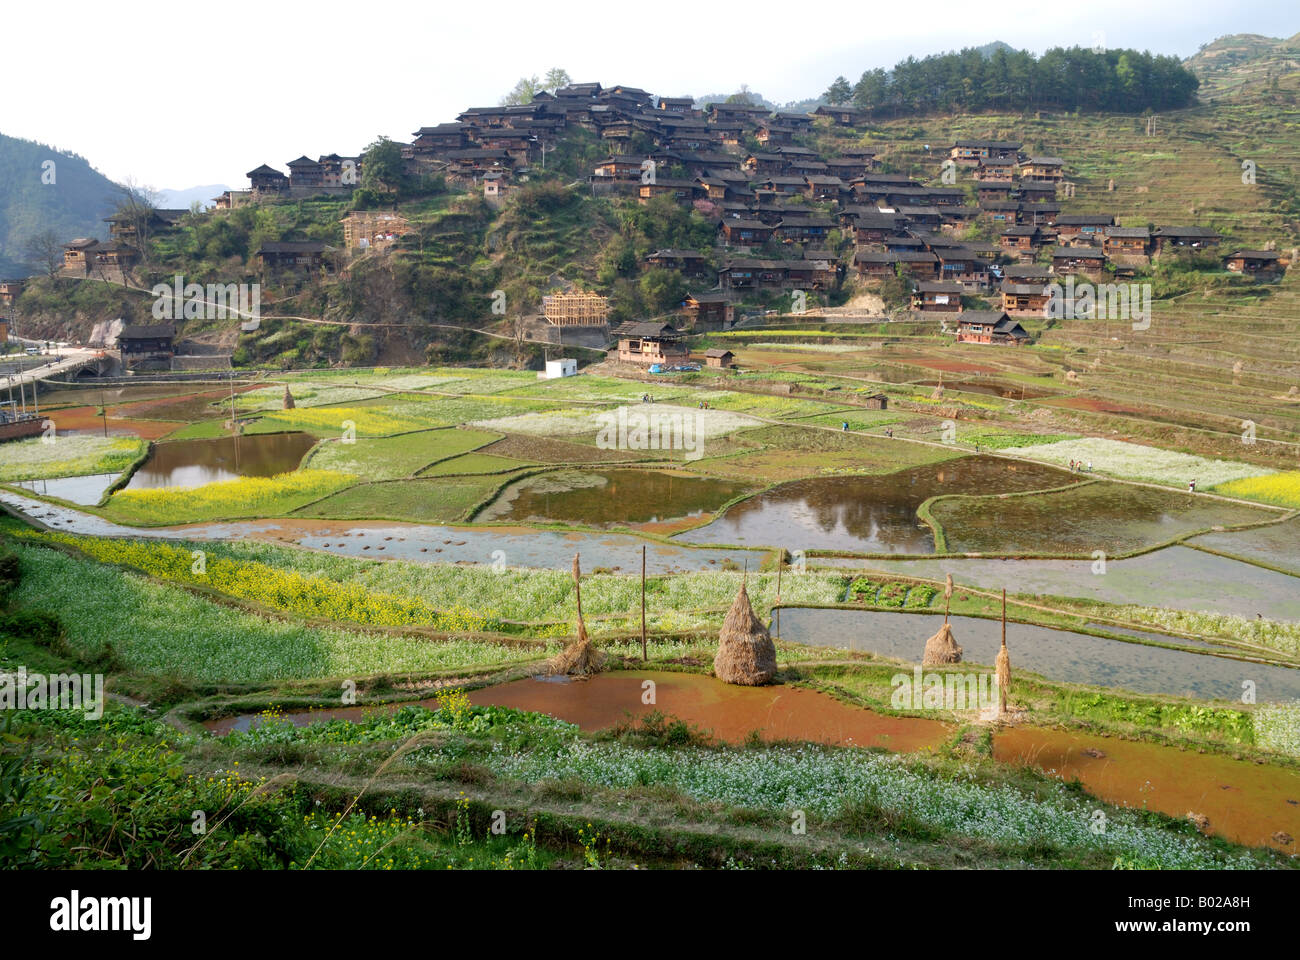 A specially irrigated or flooded field where rice is grown. Stock Photo